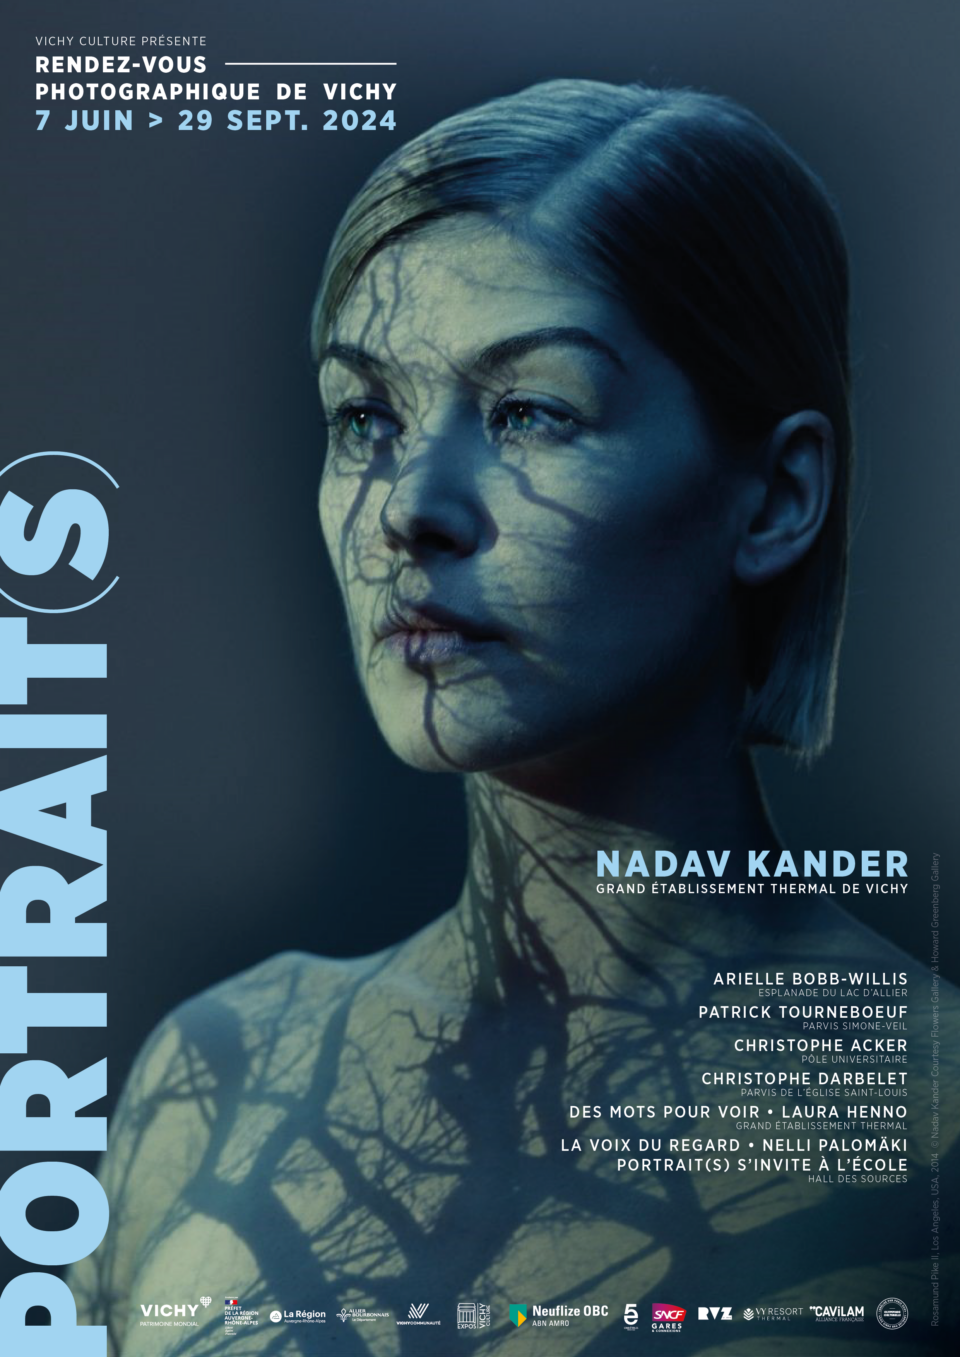 Nadav Kander as guest star of the festival “PORTRAIT(S)” in Vichy